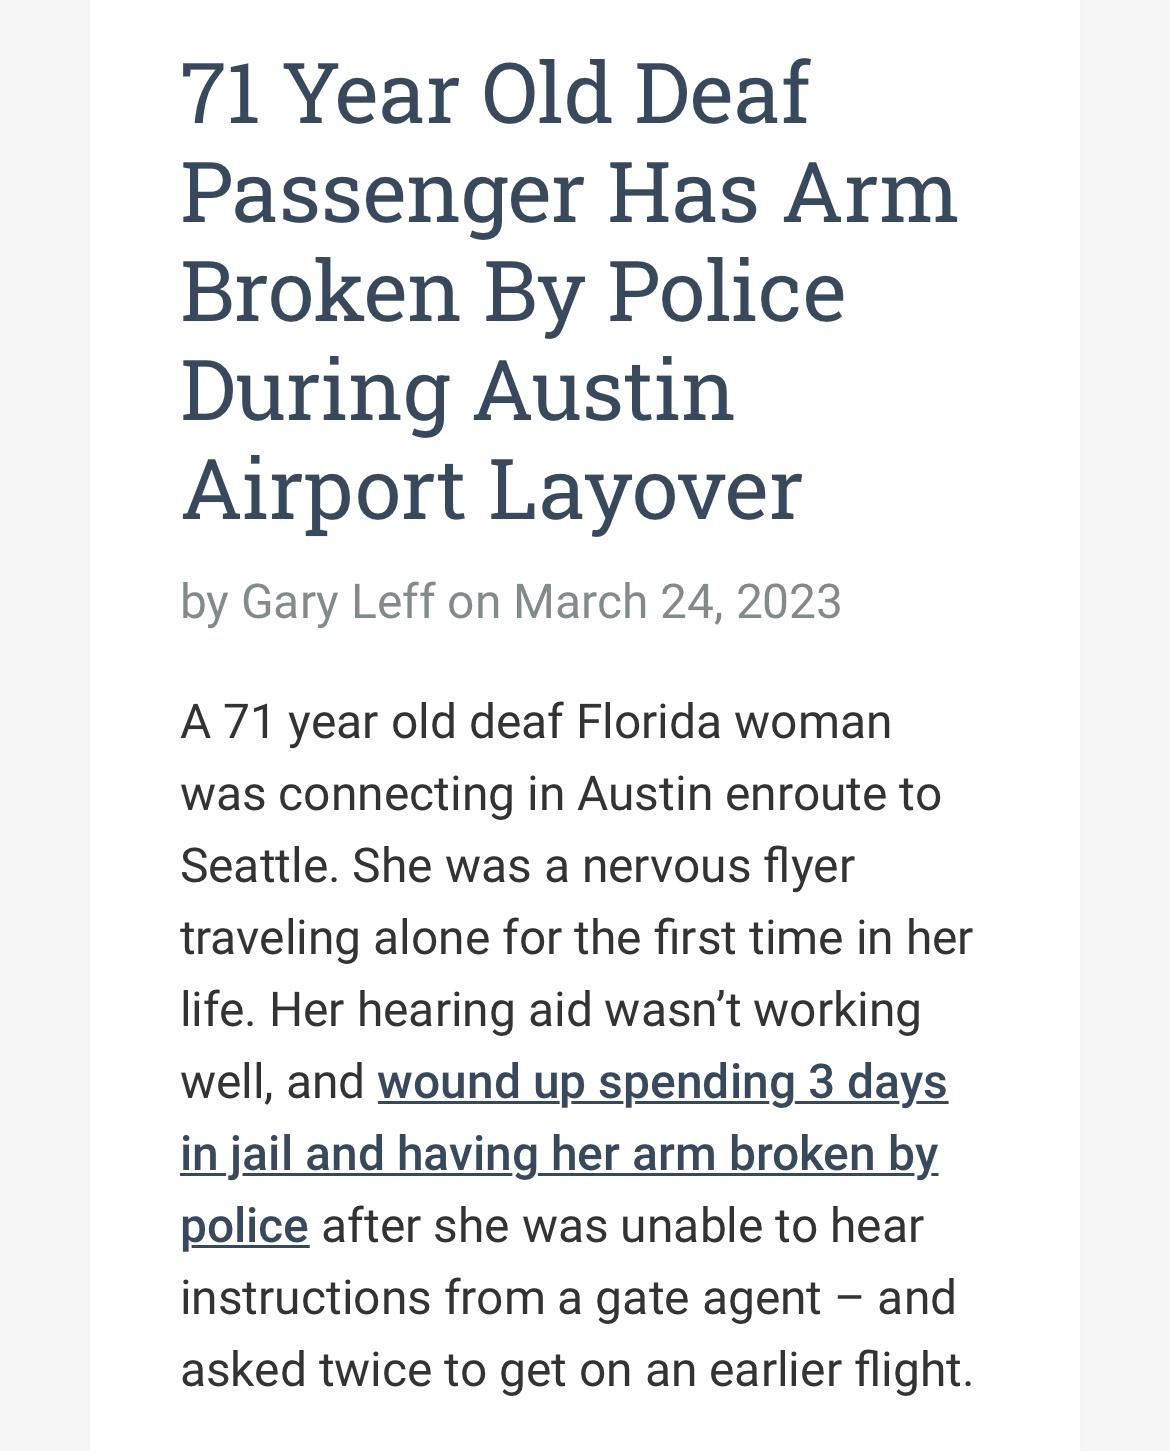 71 one year frail deaf girl has her arm broken by police on account of airline agents couldn’t be bothered